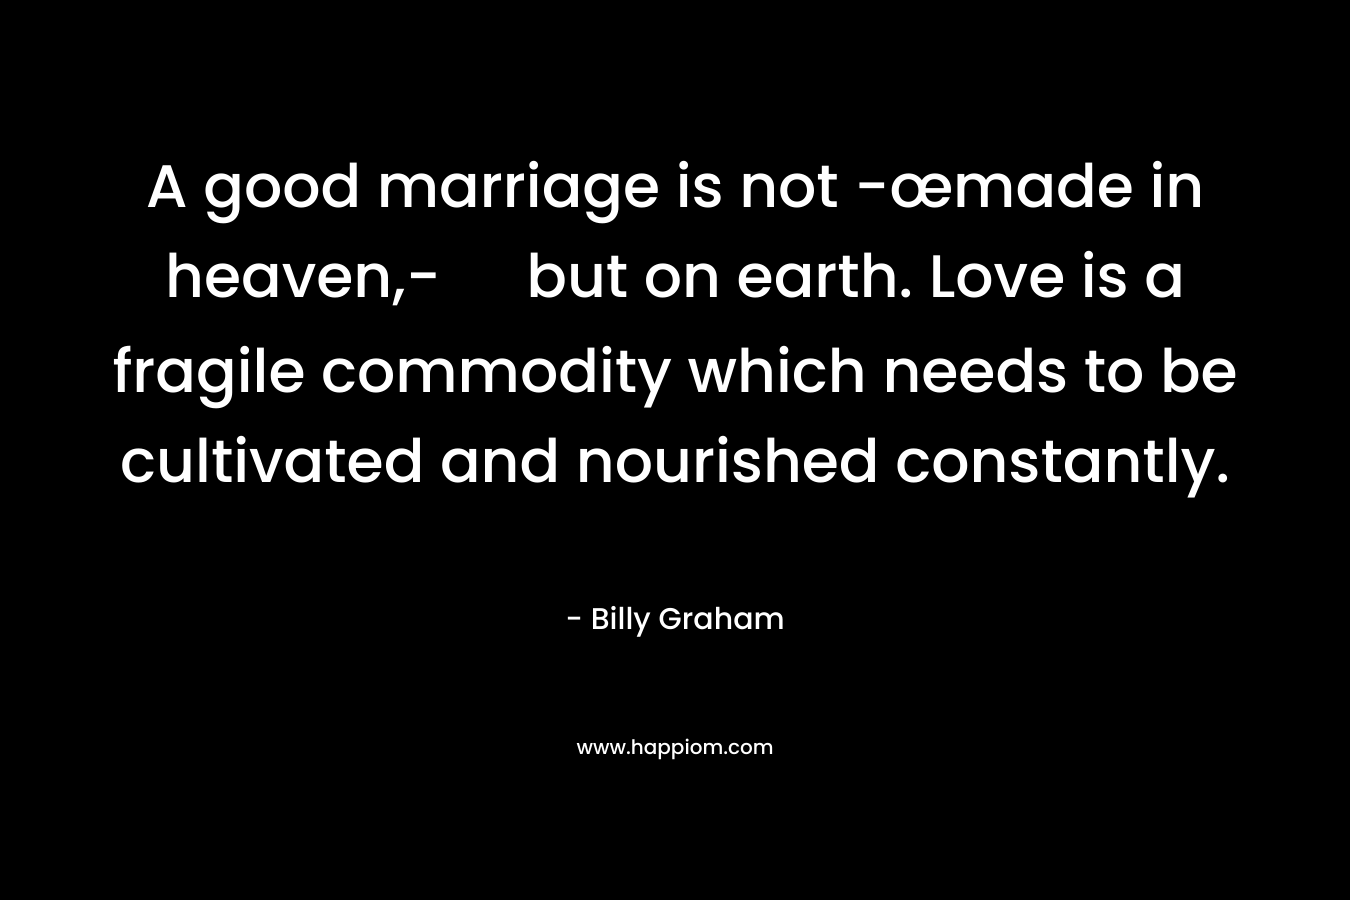 A good marriage is not -œmade in heaven,- but on earth. Love is a fragile commodity which needs to be cultivated and nourished constantly.